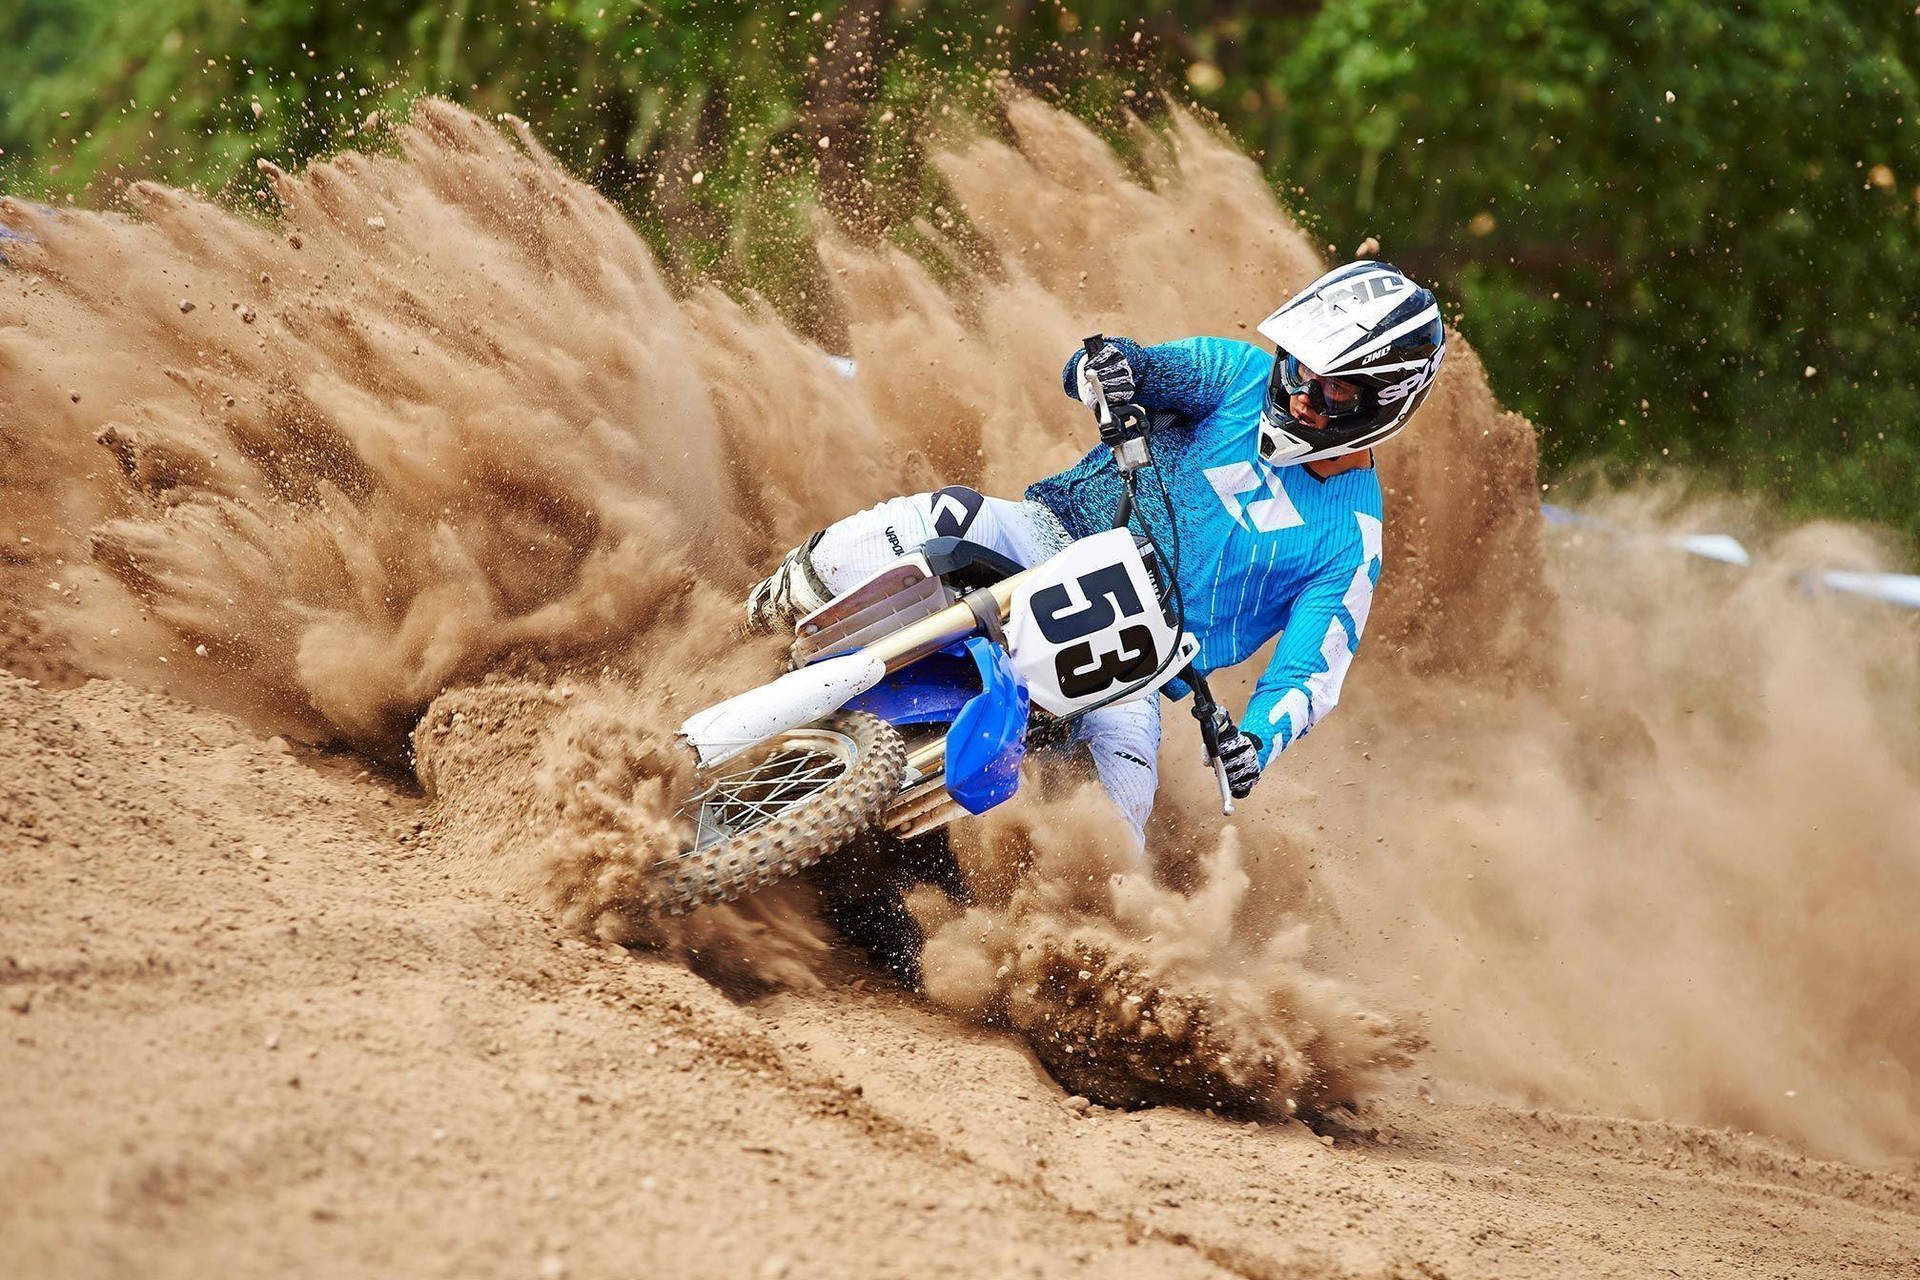 Dirt Bike 2014X1343 Wallpaper and Background Image